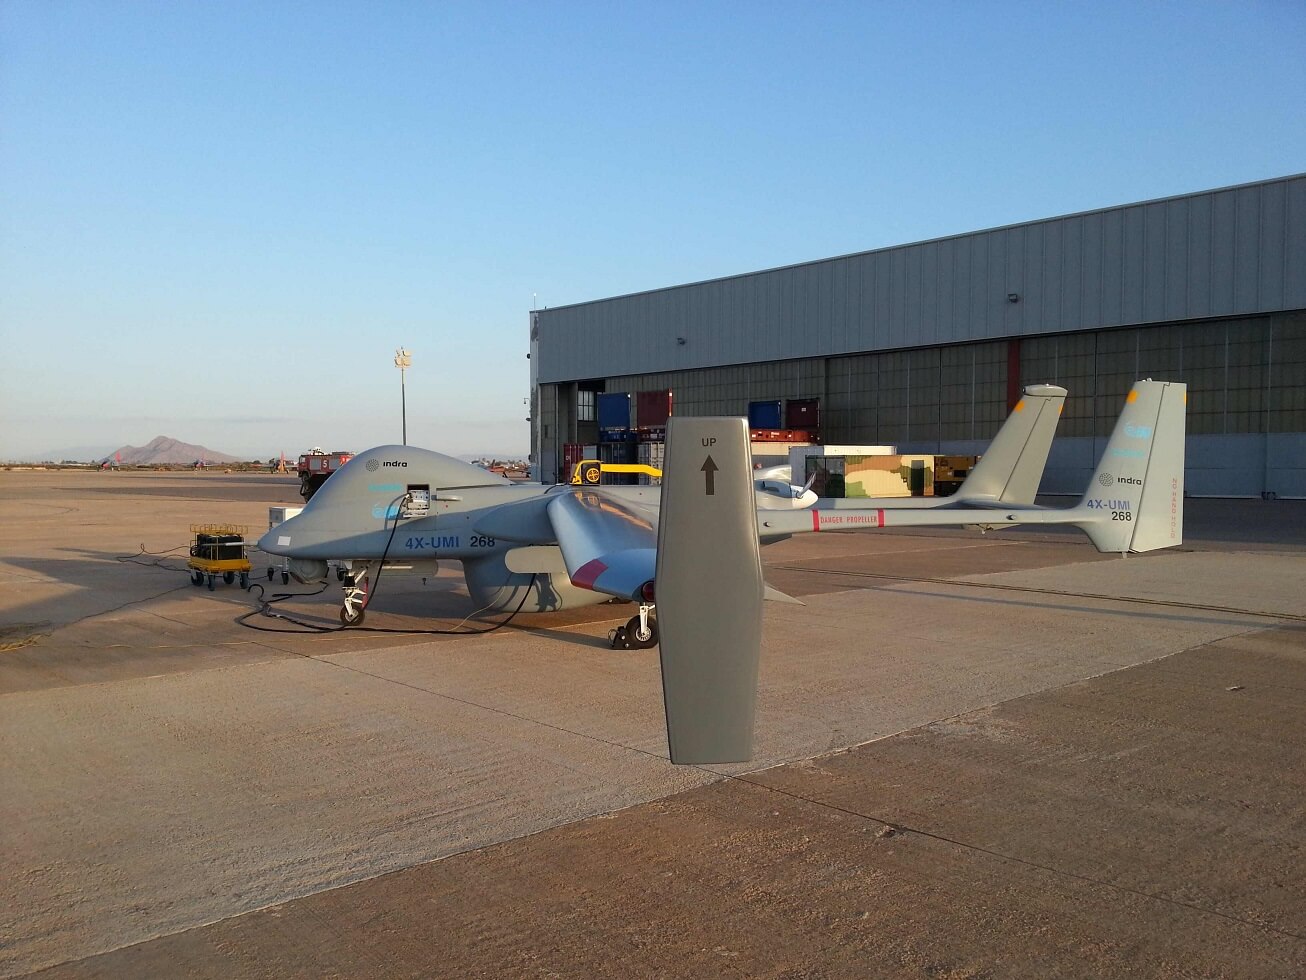 The Heron UAV of the aviation industry at an airport in Spain on the occasion of testing the integration of UAVs into civil aviation. Photo: the aviation industry